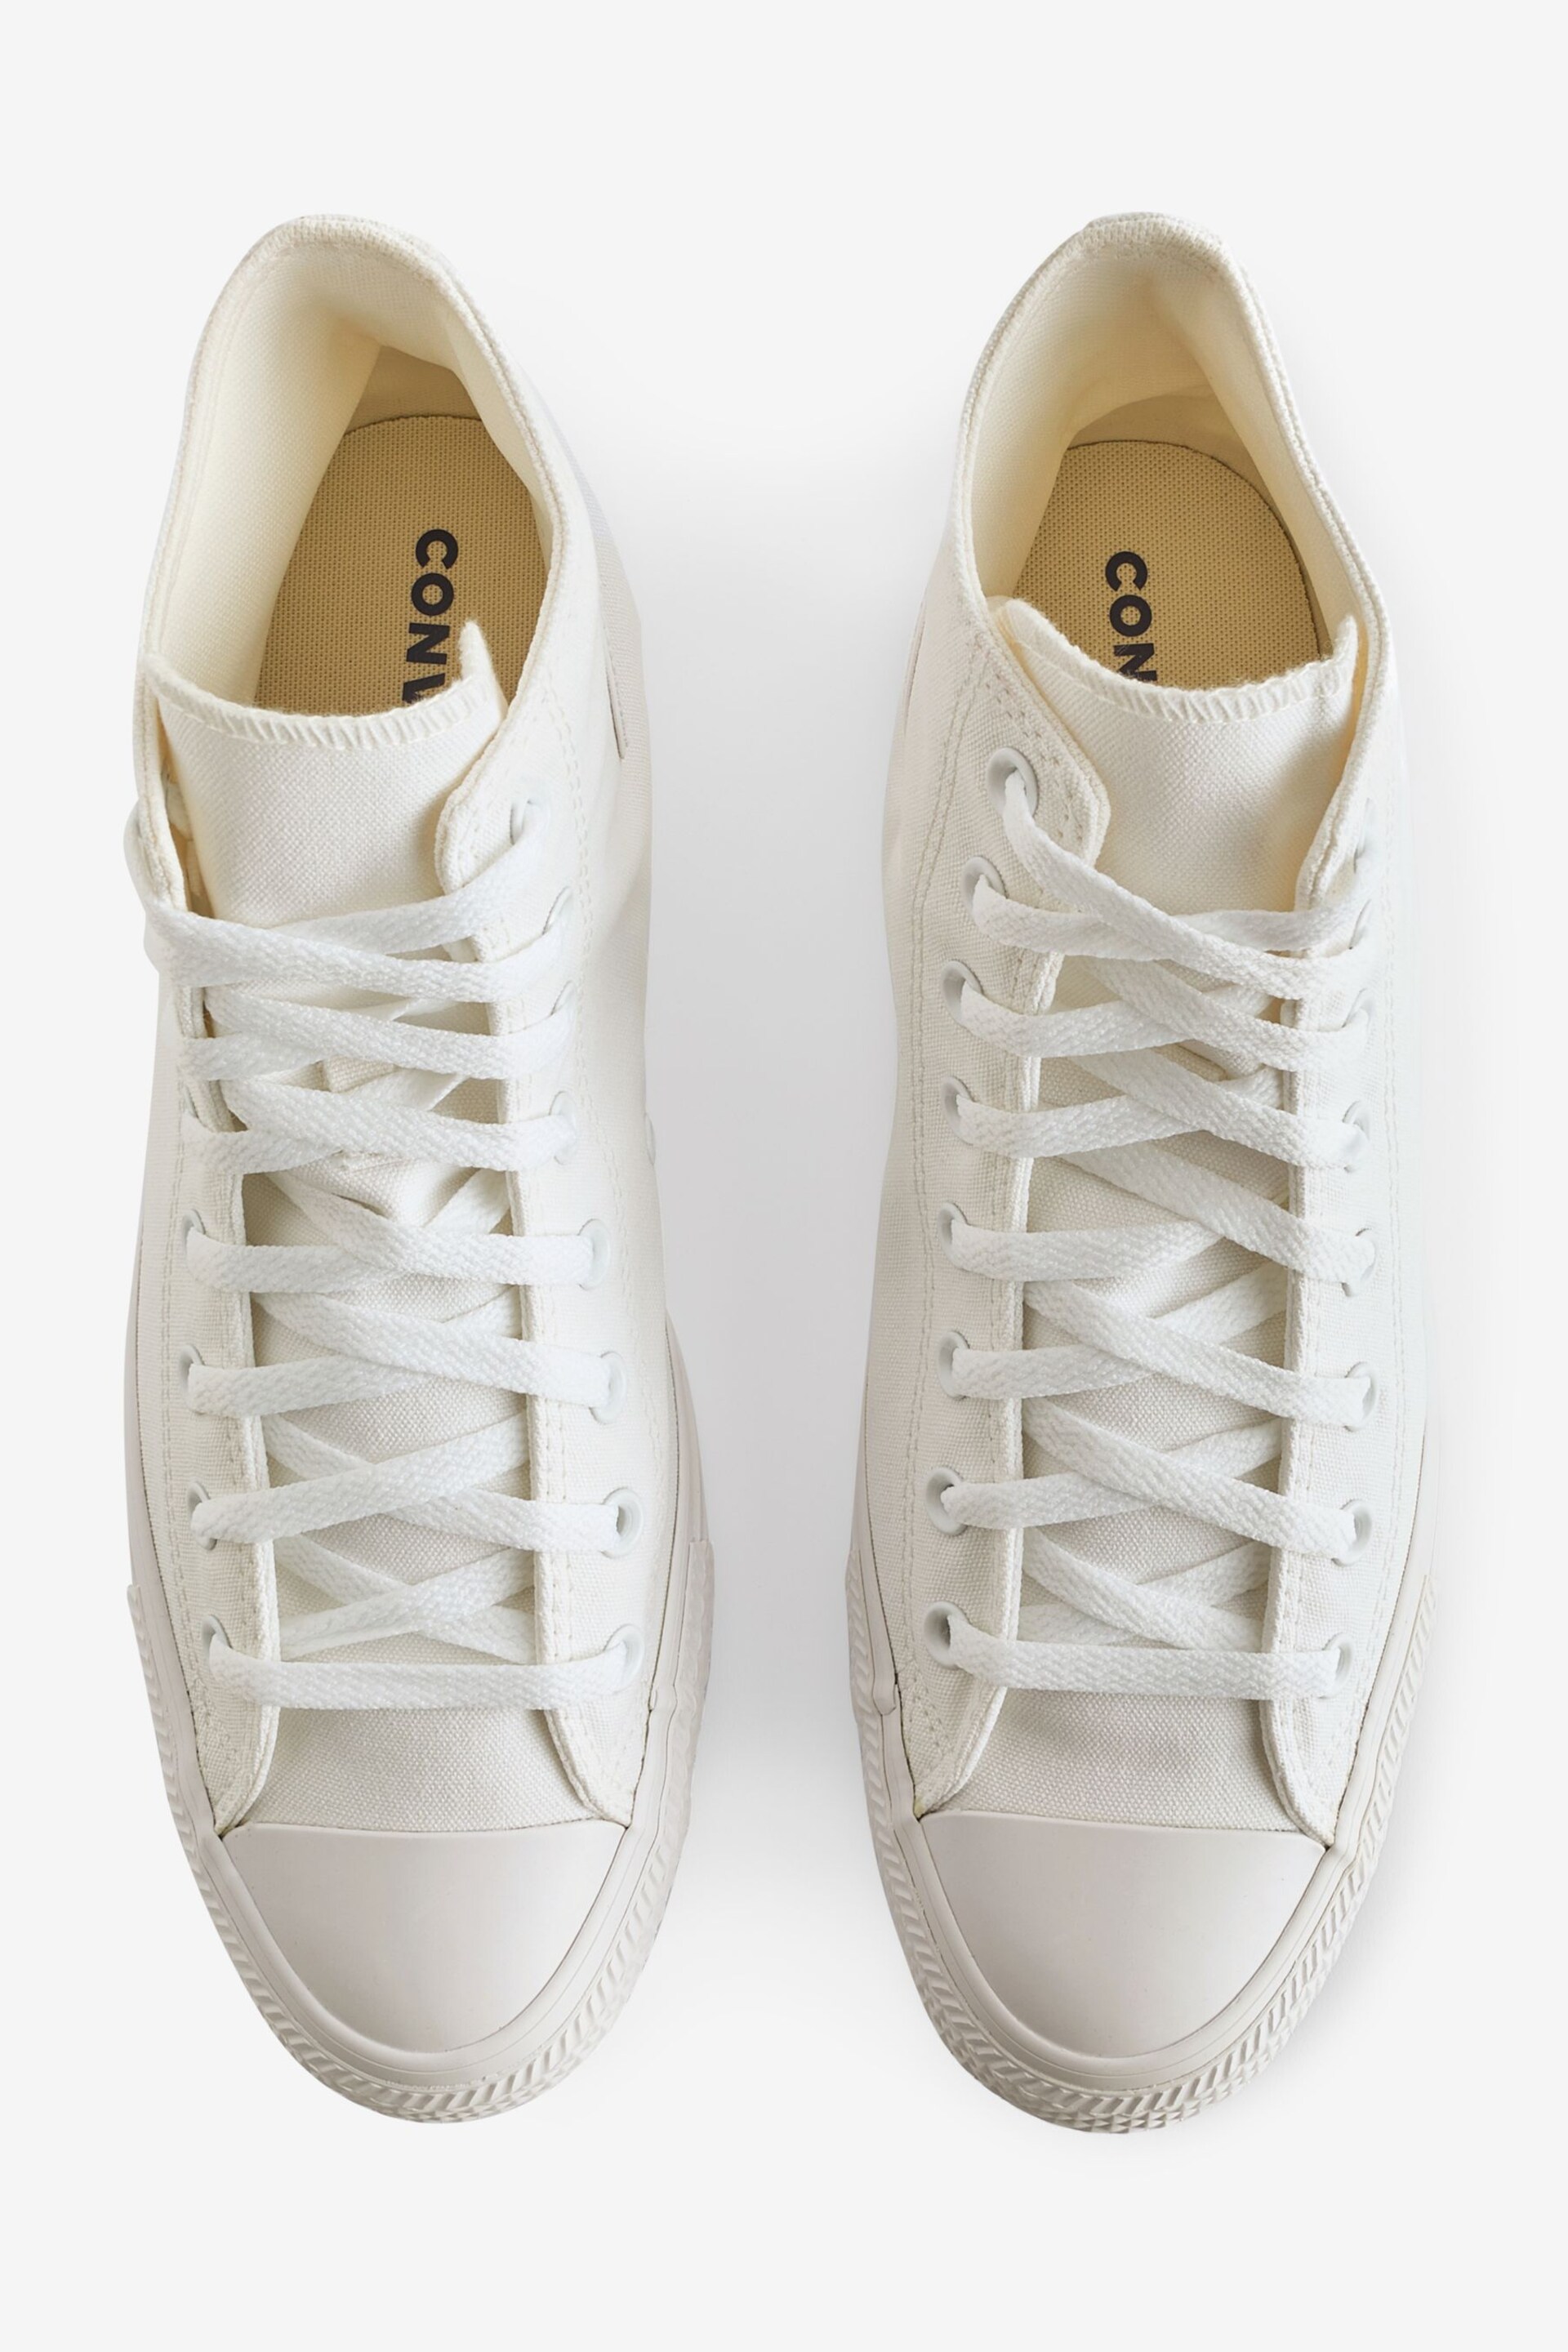 Converse White Chuck High Trainers - Image 6 of 9